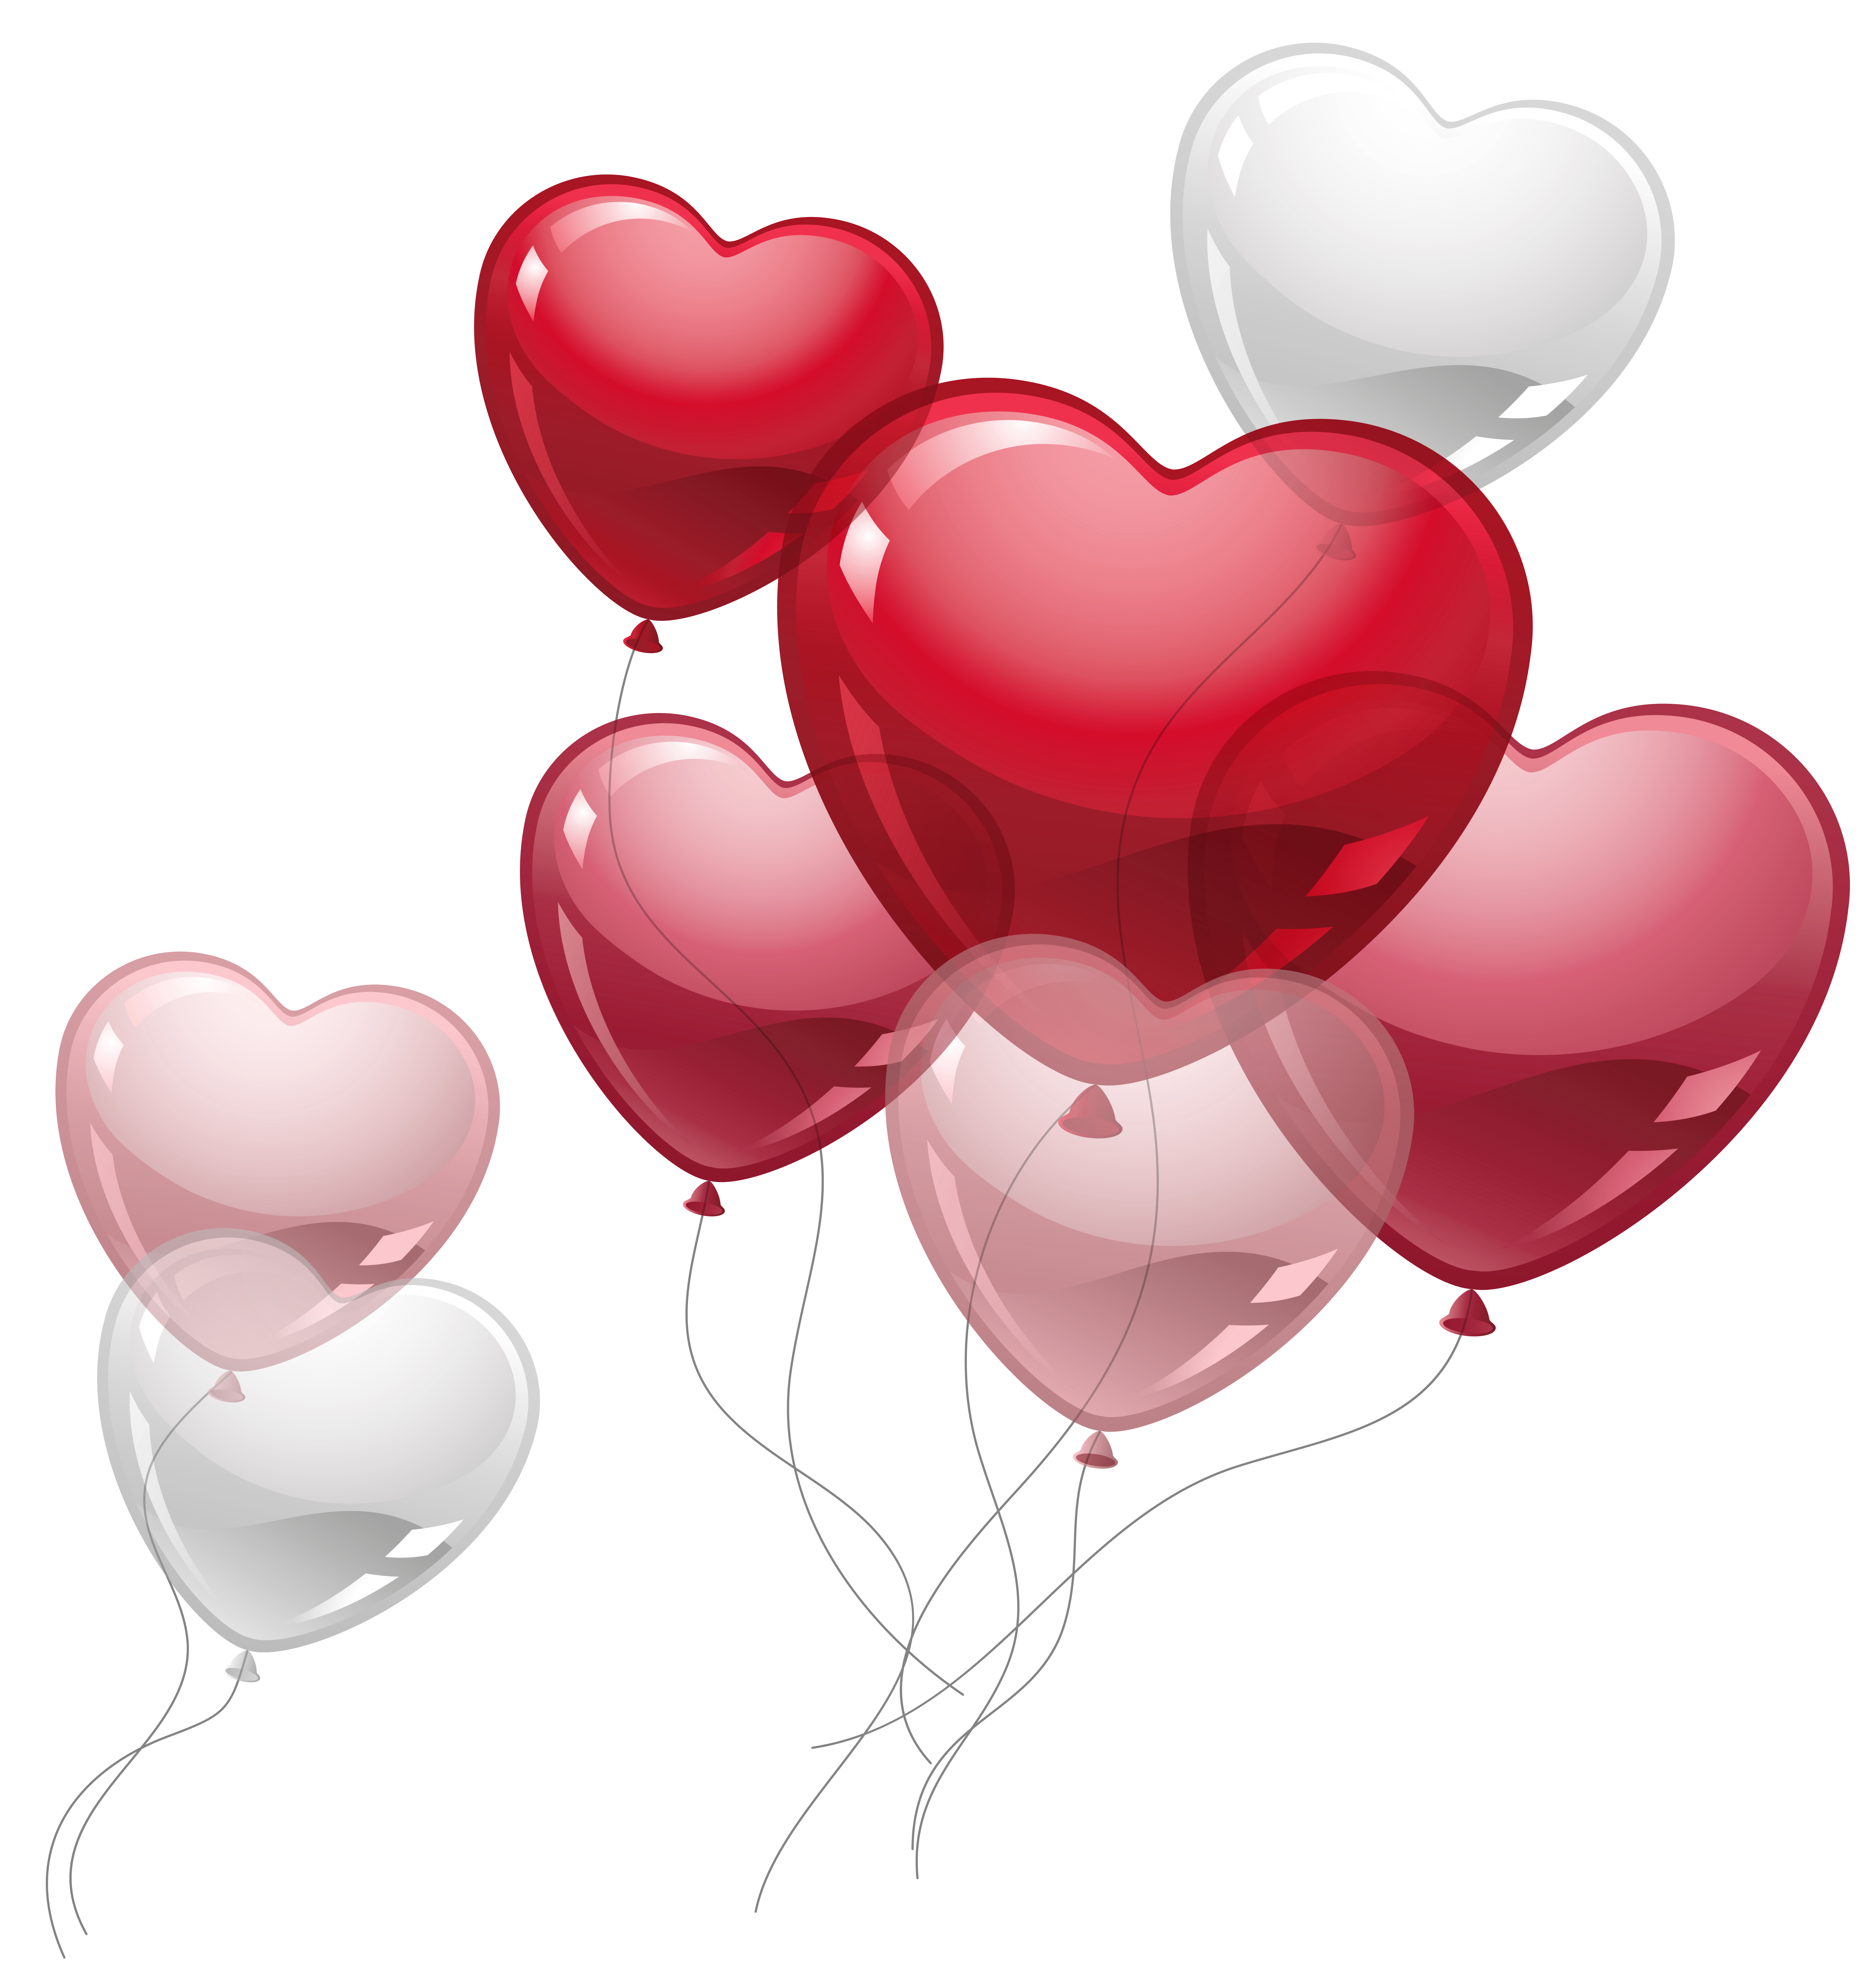 Heart Balloon Balloons Picture Cute Free Transparent Image HD PNG Image